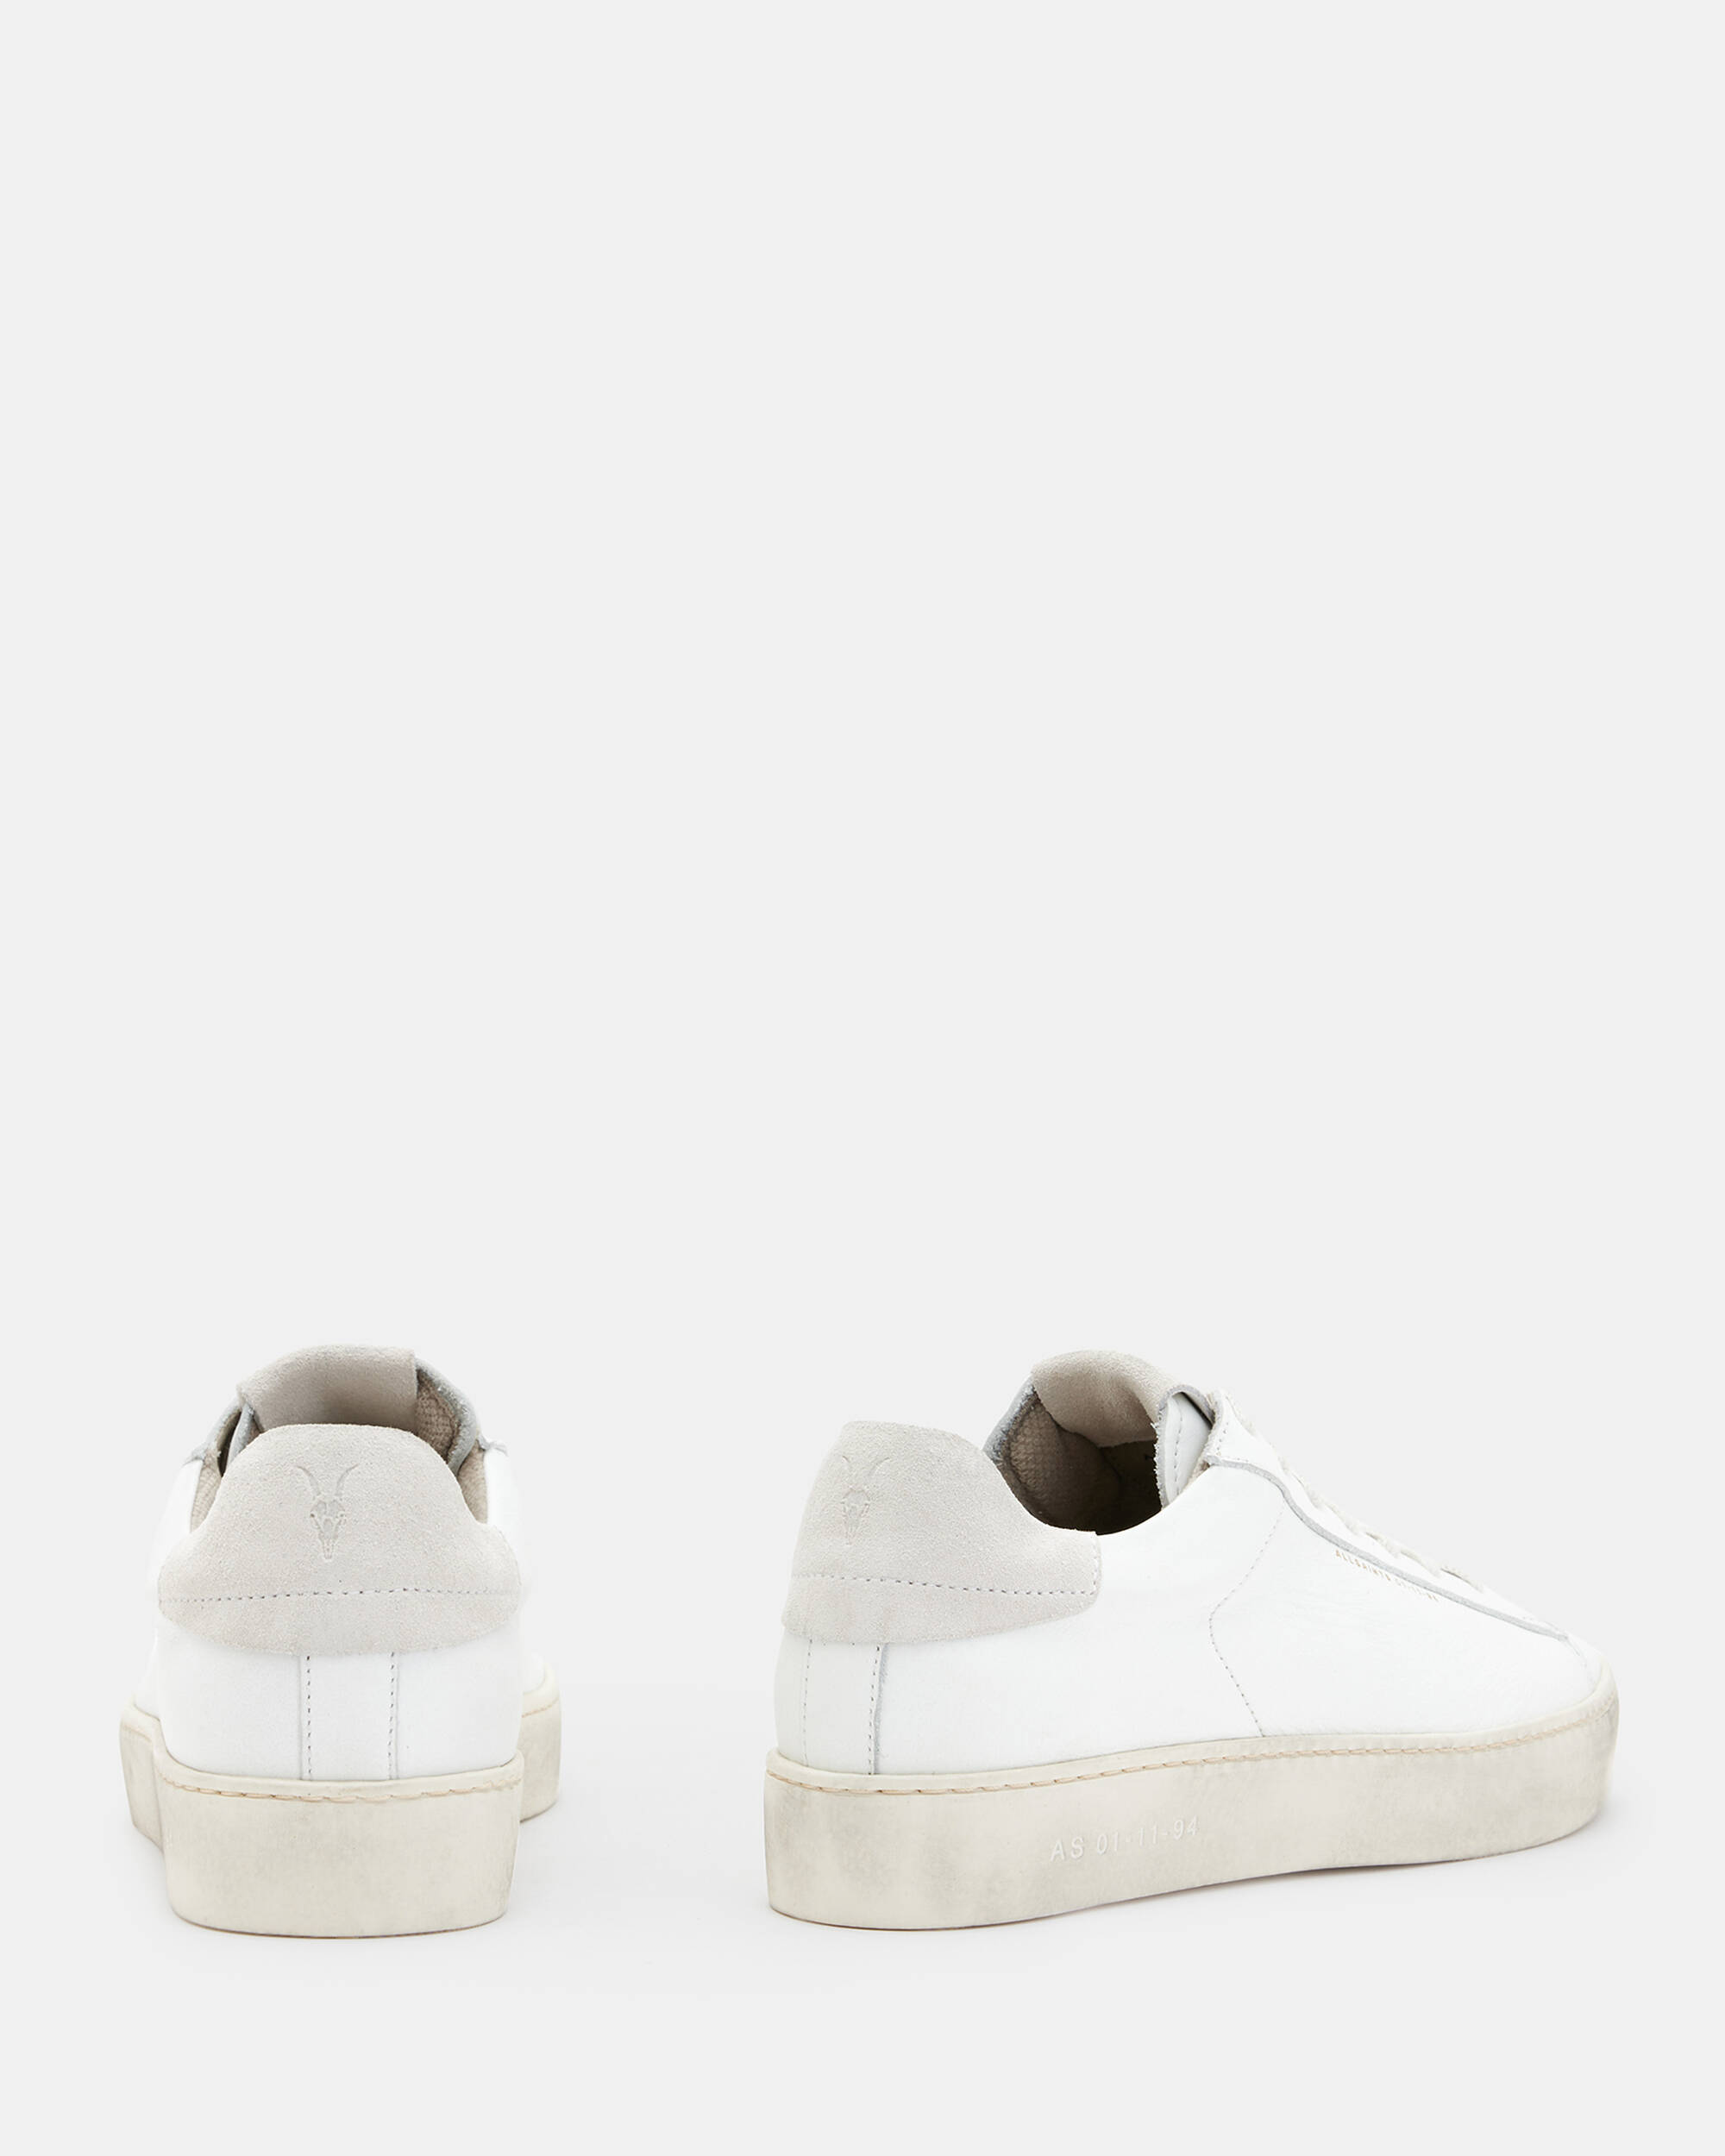 Shana Round Toe Leather Sneakers  large image number 7